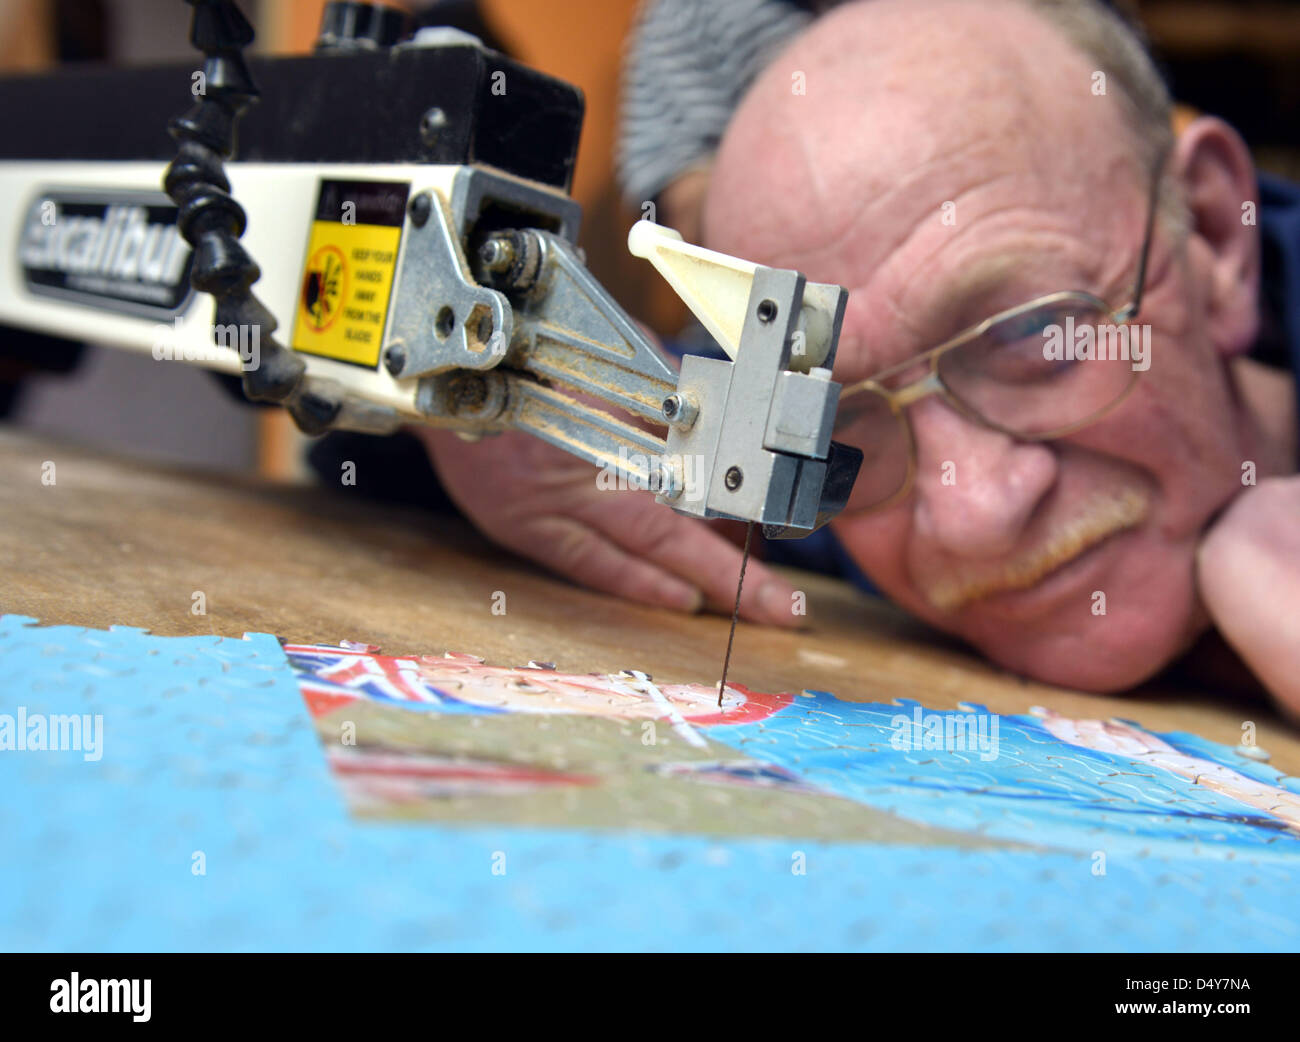 Weymouth, Dorset, UK. 20th March 2013. World record jigsaw attempt, Dave Evans at work on the largest wooden jigsaw in the world at Weymouth, Dorset, UK. The Queen's Diamond Jubilee jigsaw will take him weeks to cut out. Changing hundreds of blades and trying to keep his fingers away from the busy blade!. The 40,000 piece jigsaw will be around 3 metres by 4 metres when finished. 20th March, 2013 Picture by Geoff Moore/Dorset Media Service/Alamy Live News Stock Photo